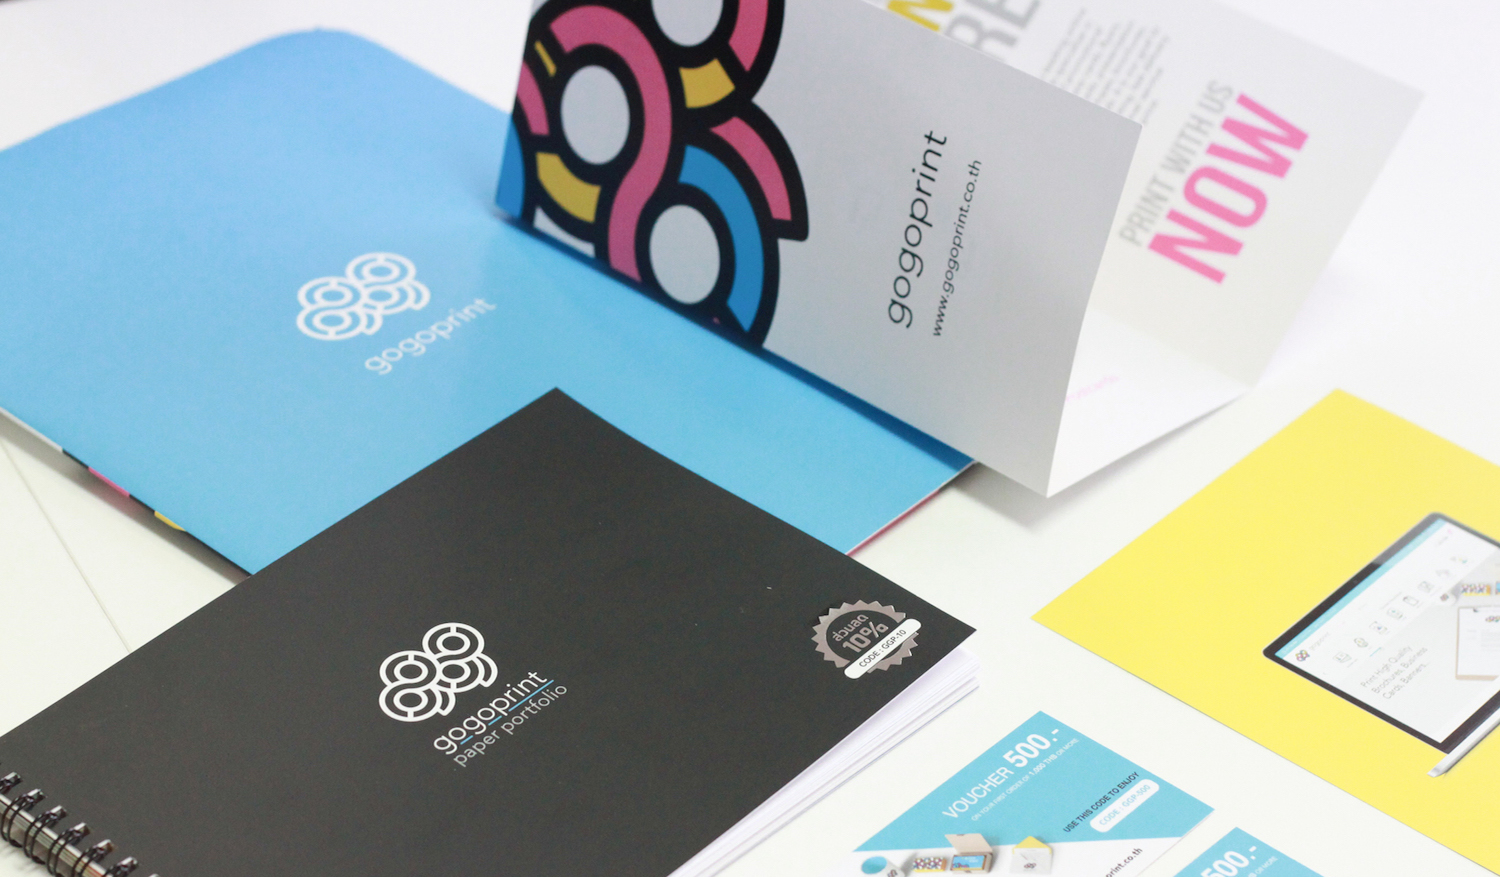 Online printing startup Gogoprint launches in Singapore